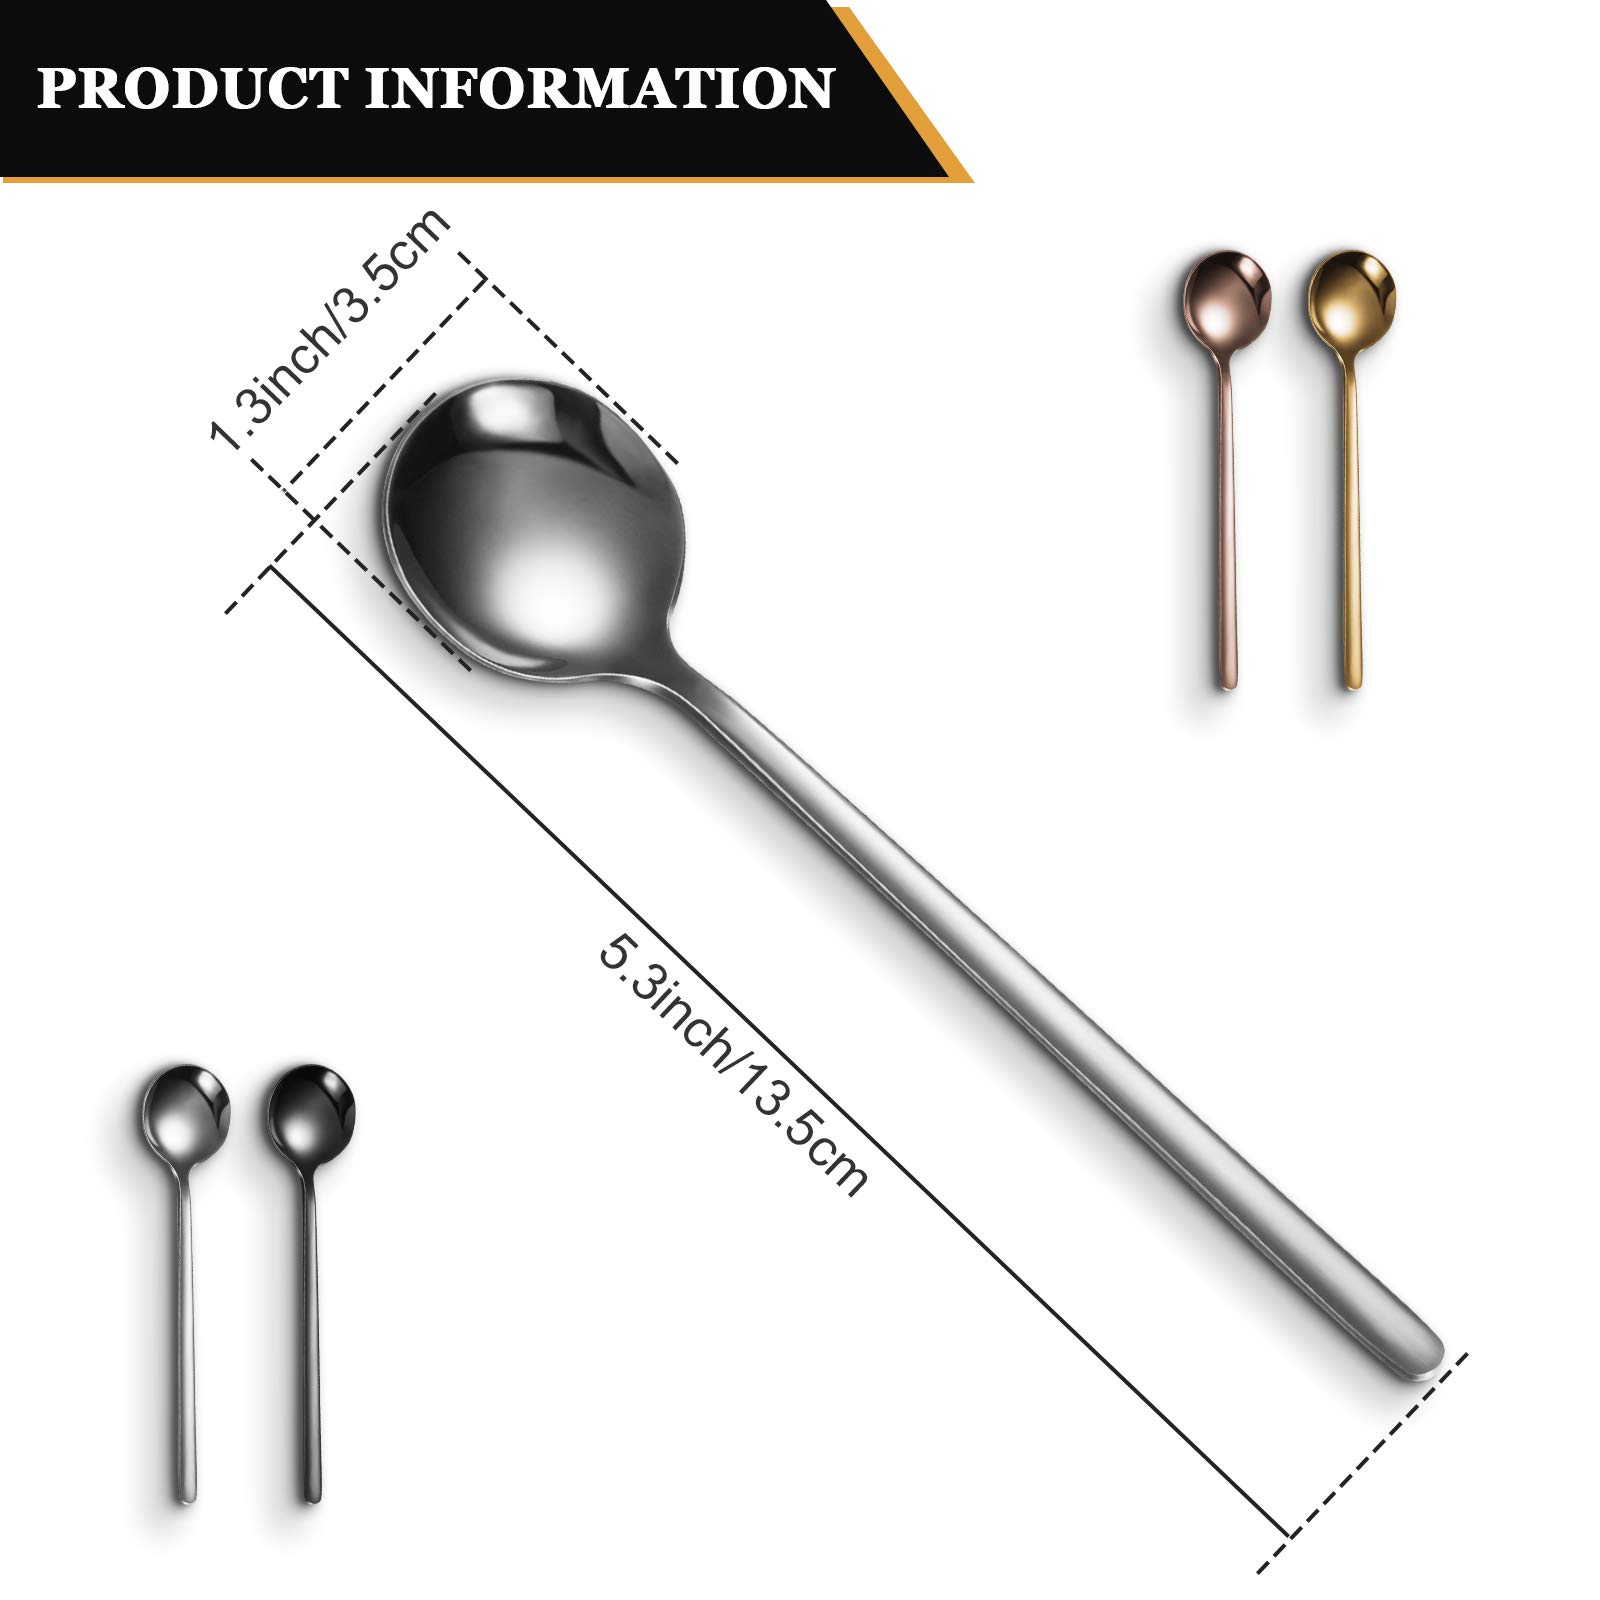 4 Pieces Coffee Spoons Teaspoons Stainless Steel Espresso Spoons Frosted Handle Soup Spoons for Coffee Sugar Soup Ice Cream Dessert Cake Supplies, 5.31 Inch and 4 Colors